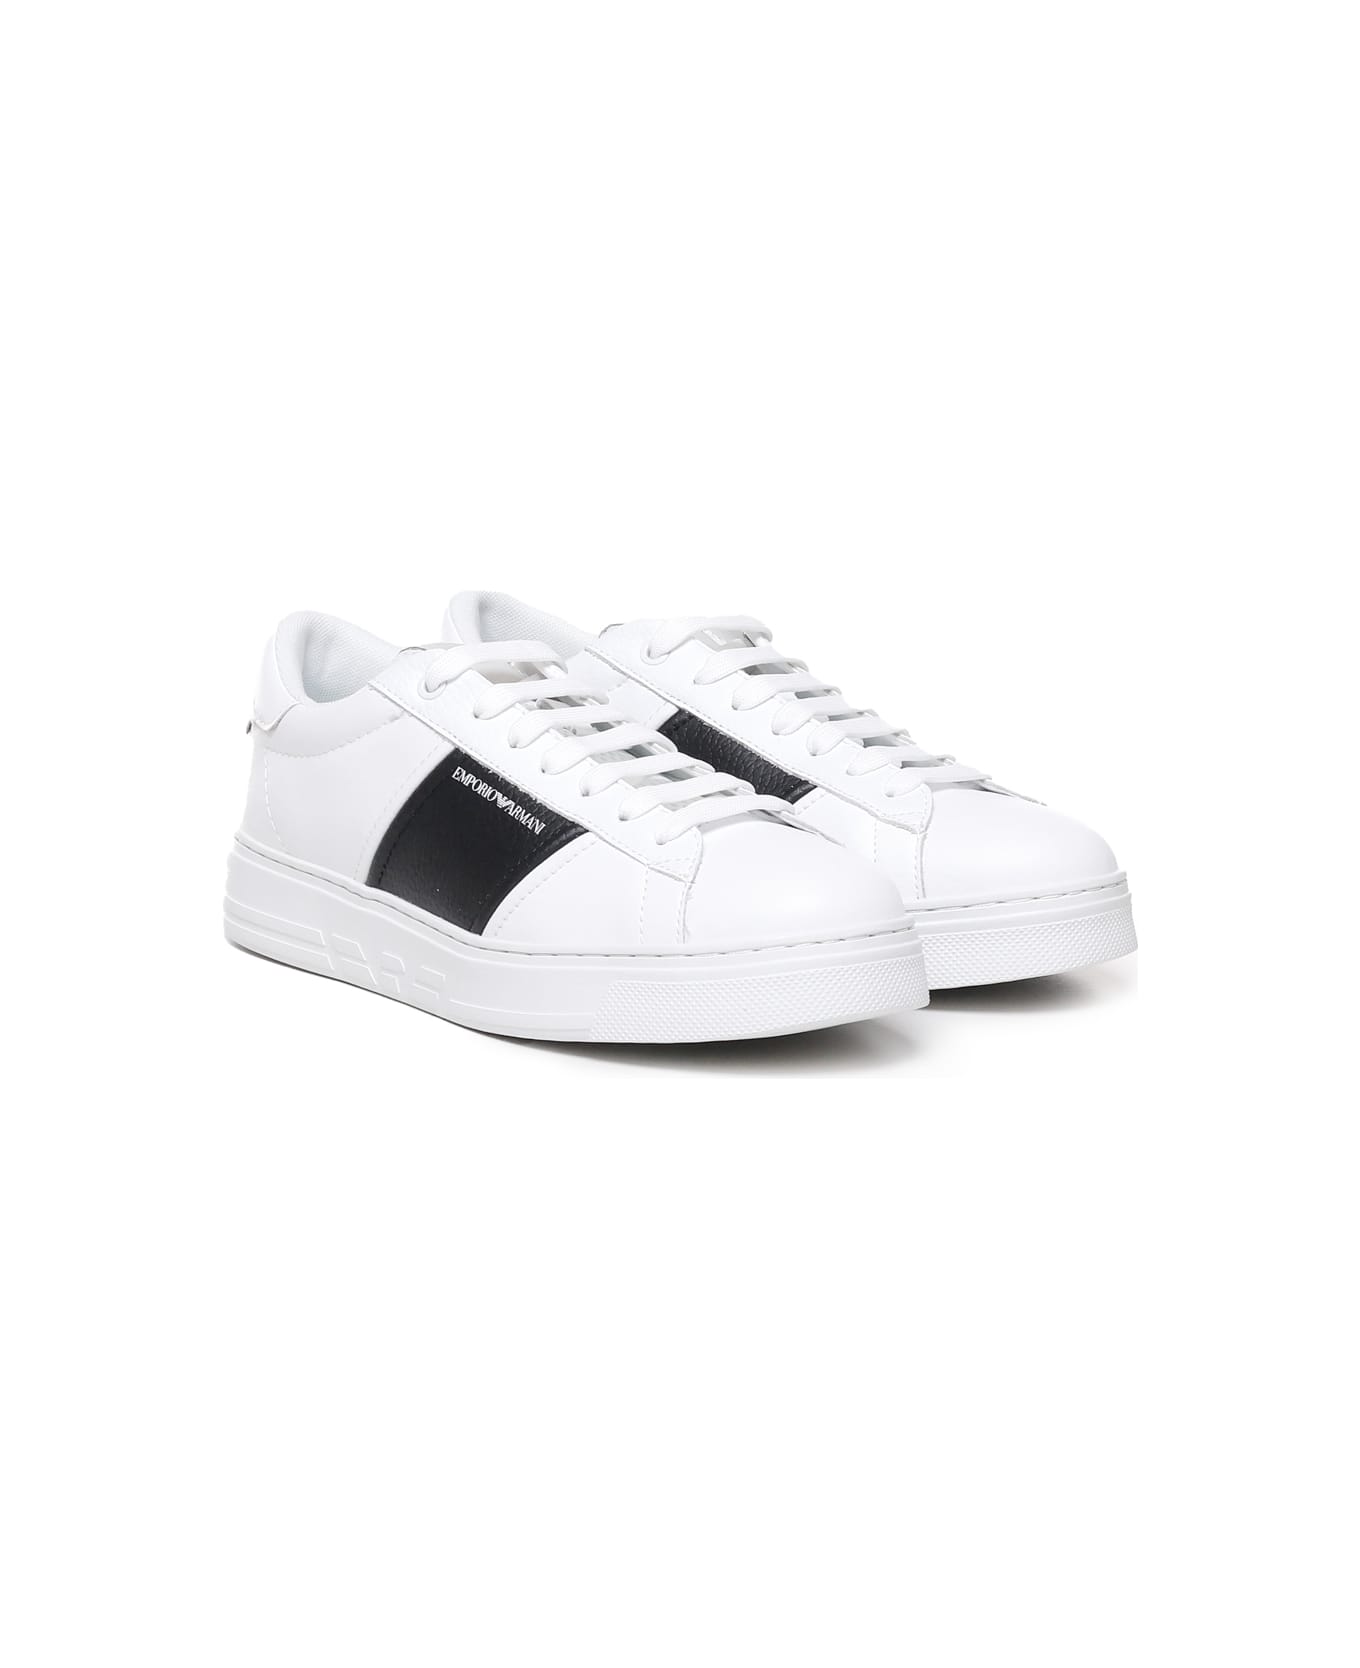 Emporio Armani Leather Sneakers With Logo スニーカー